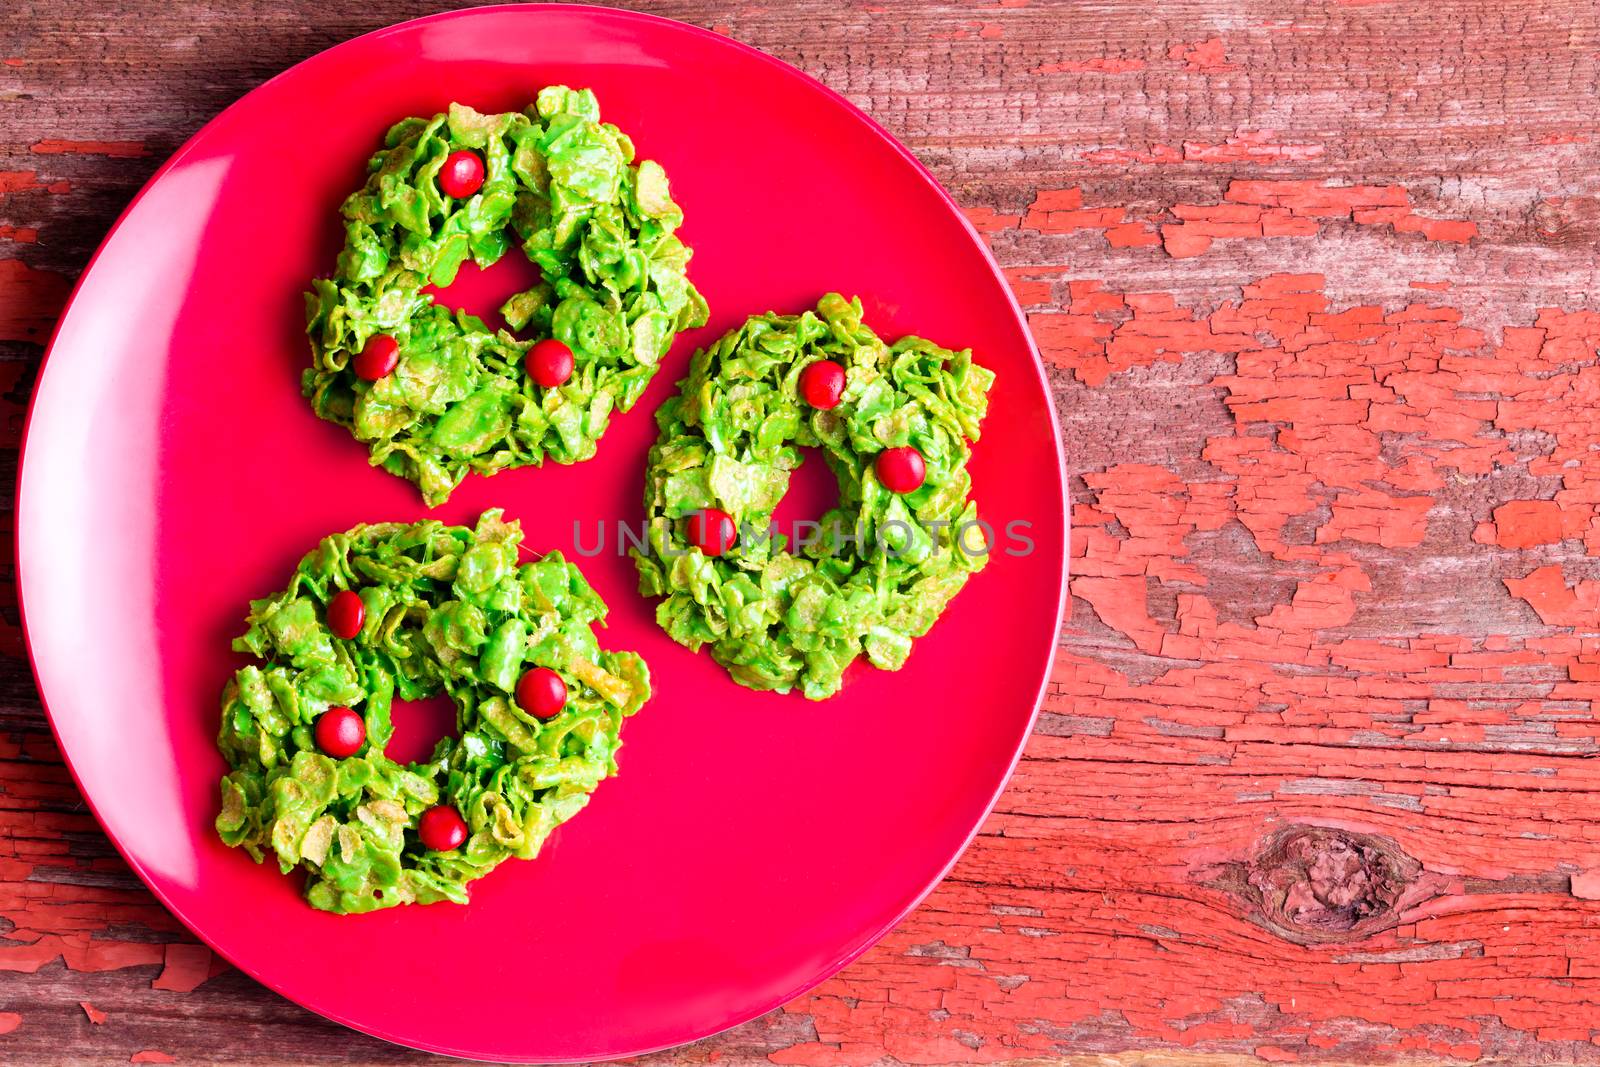 Festive colorful green Christmas cornflake wreath cookies displayed on a red plate on a cozy red rustic wooden table viewed from above with copy space